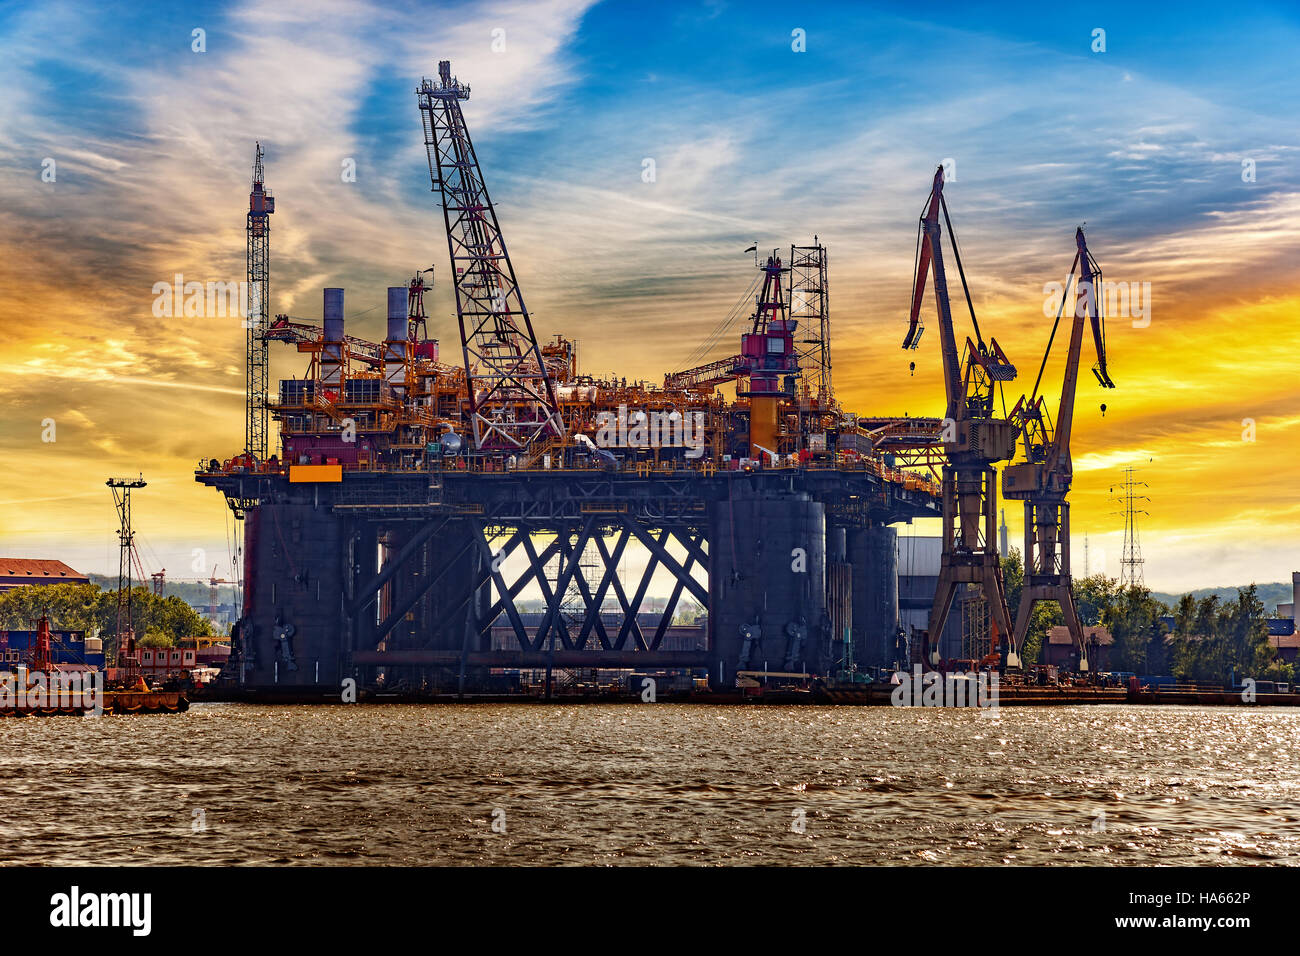 Oil rig under construction at sunset in Gdansk, Poland. Stock Photo